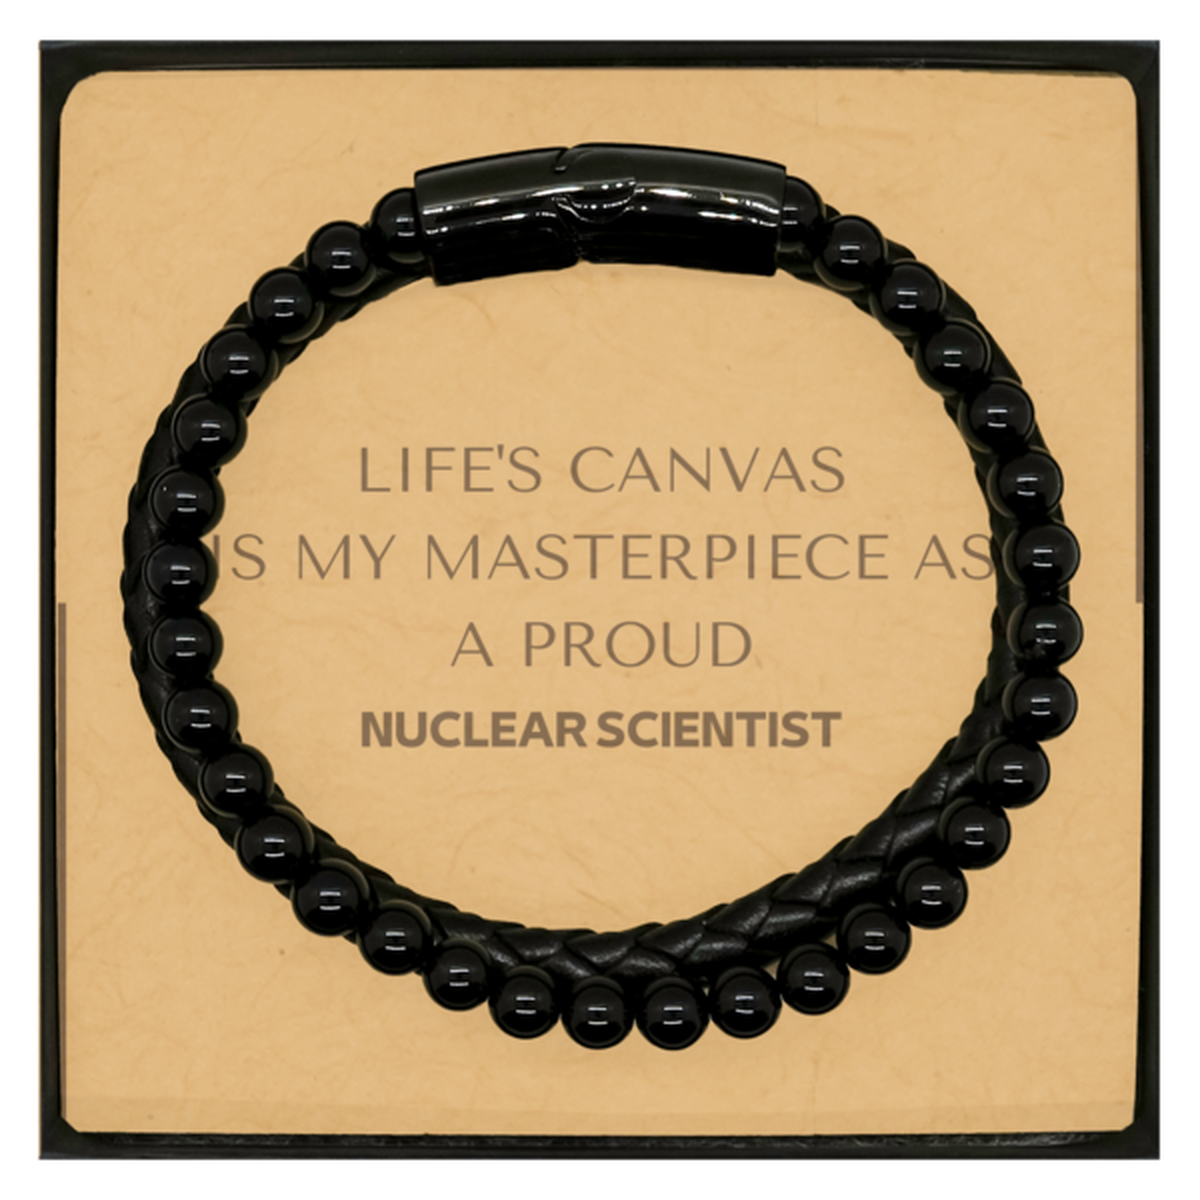 Proud Nuclear Scientist Gifts, Life's canvas is my masterpiece, Epic Birthday Christmas Unique Stone Leather Bracelets For Nuclear Scientist, Coworkers, Men, Women, Friends